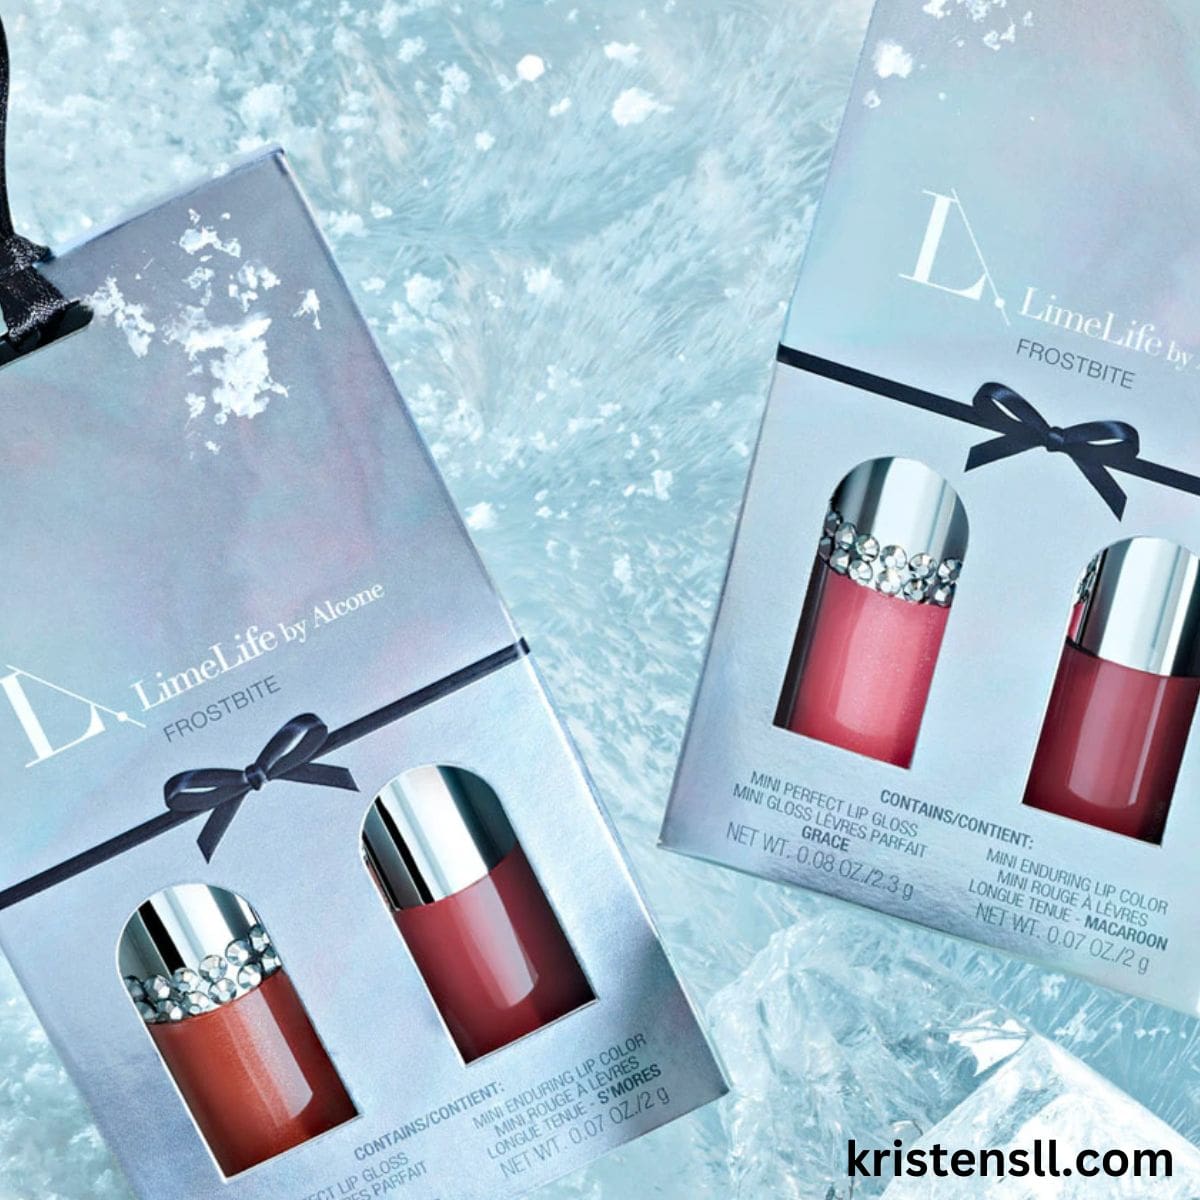 LimeLife Frostbite Lip Collections